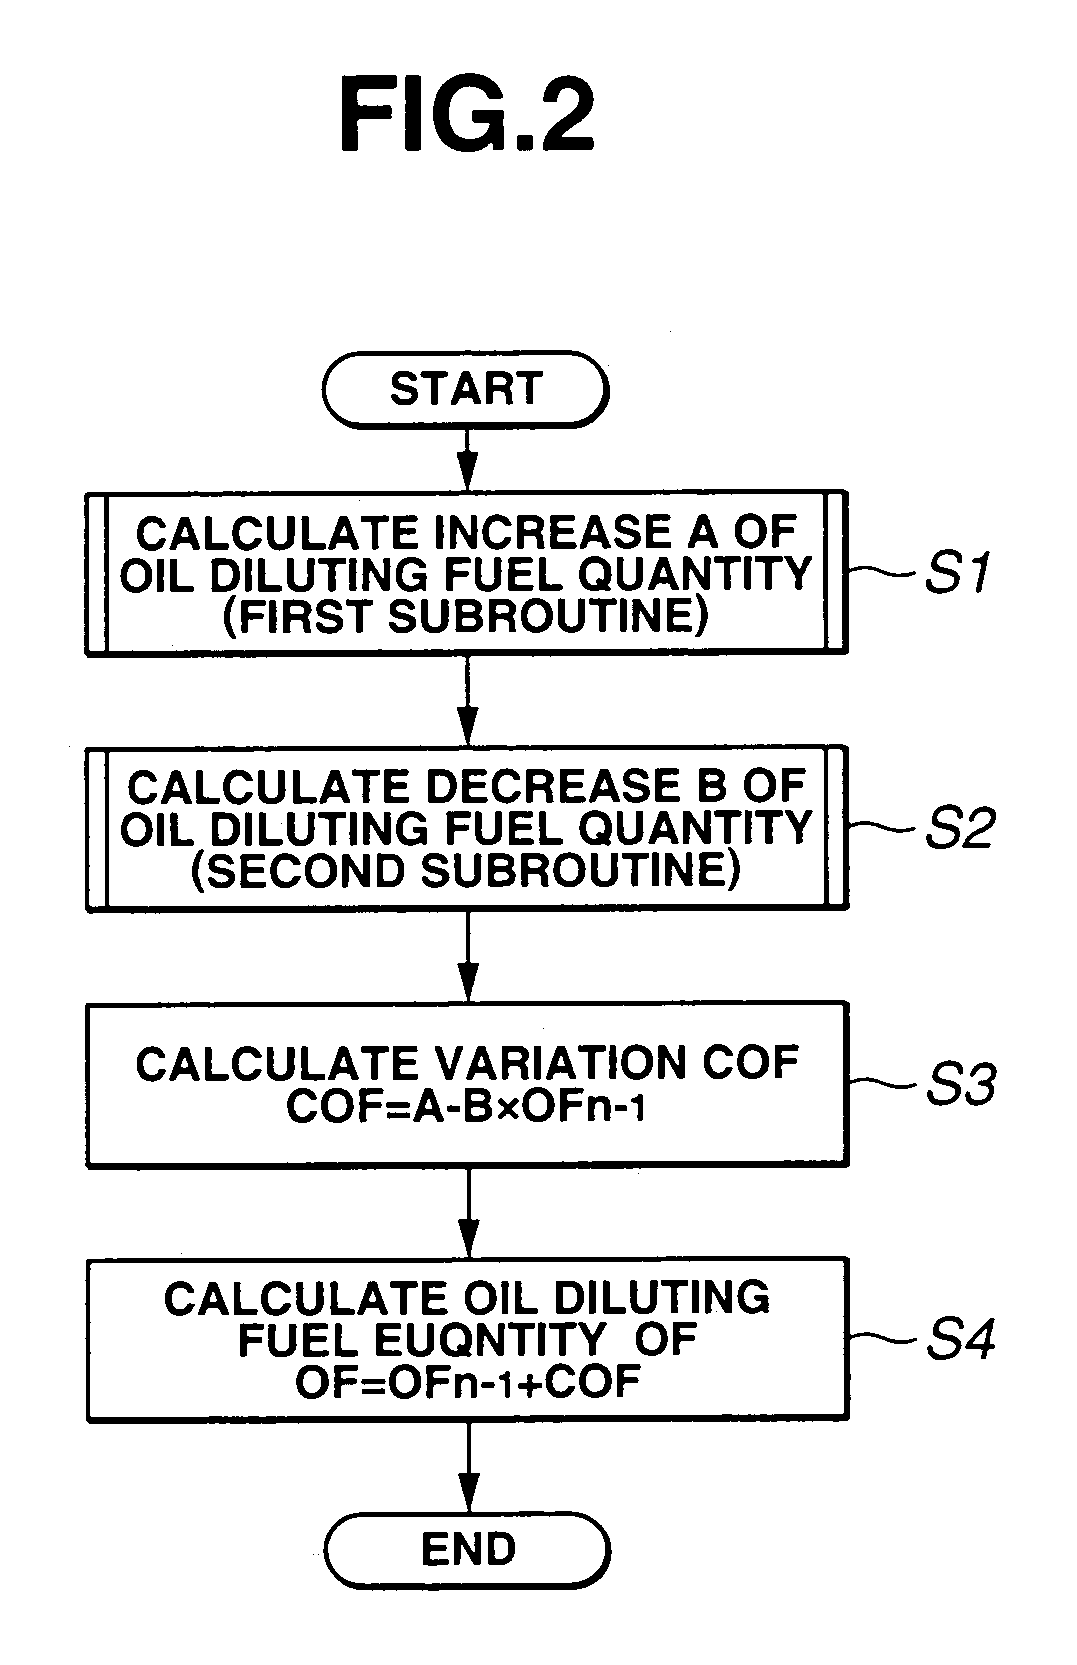 Estimation of oil-diluting fuel quantity of engine